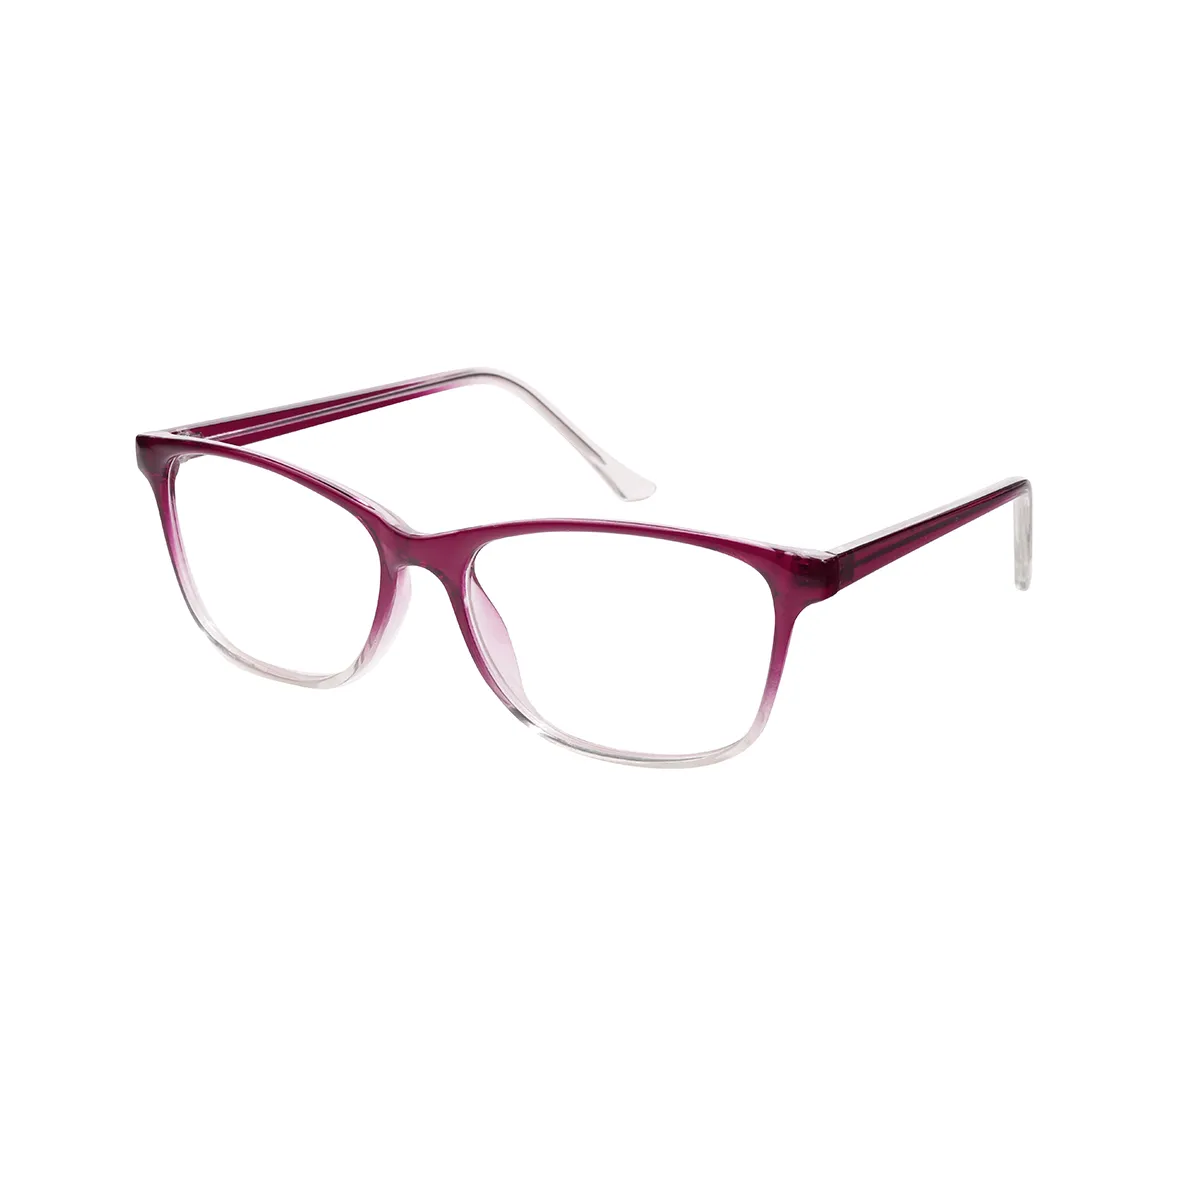 Classic Square Red Eyeglasses for Women